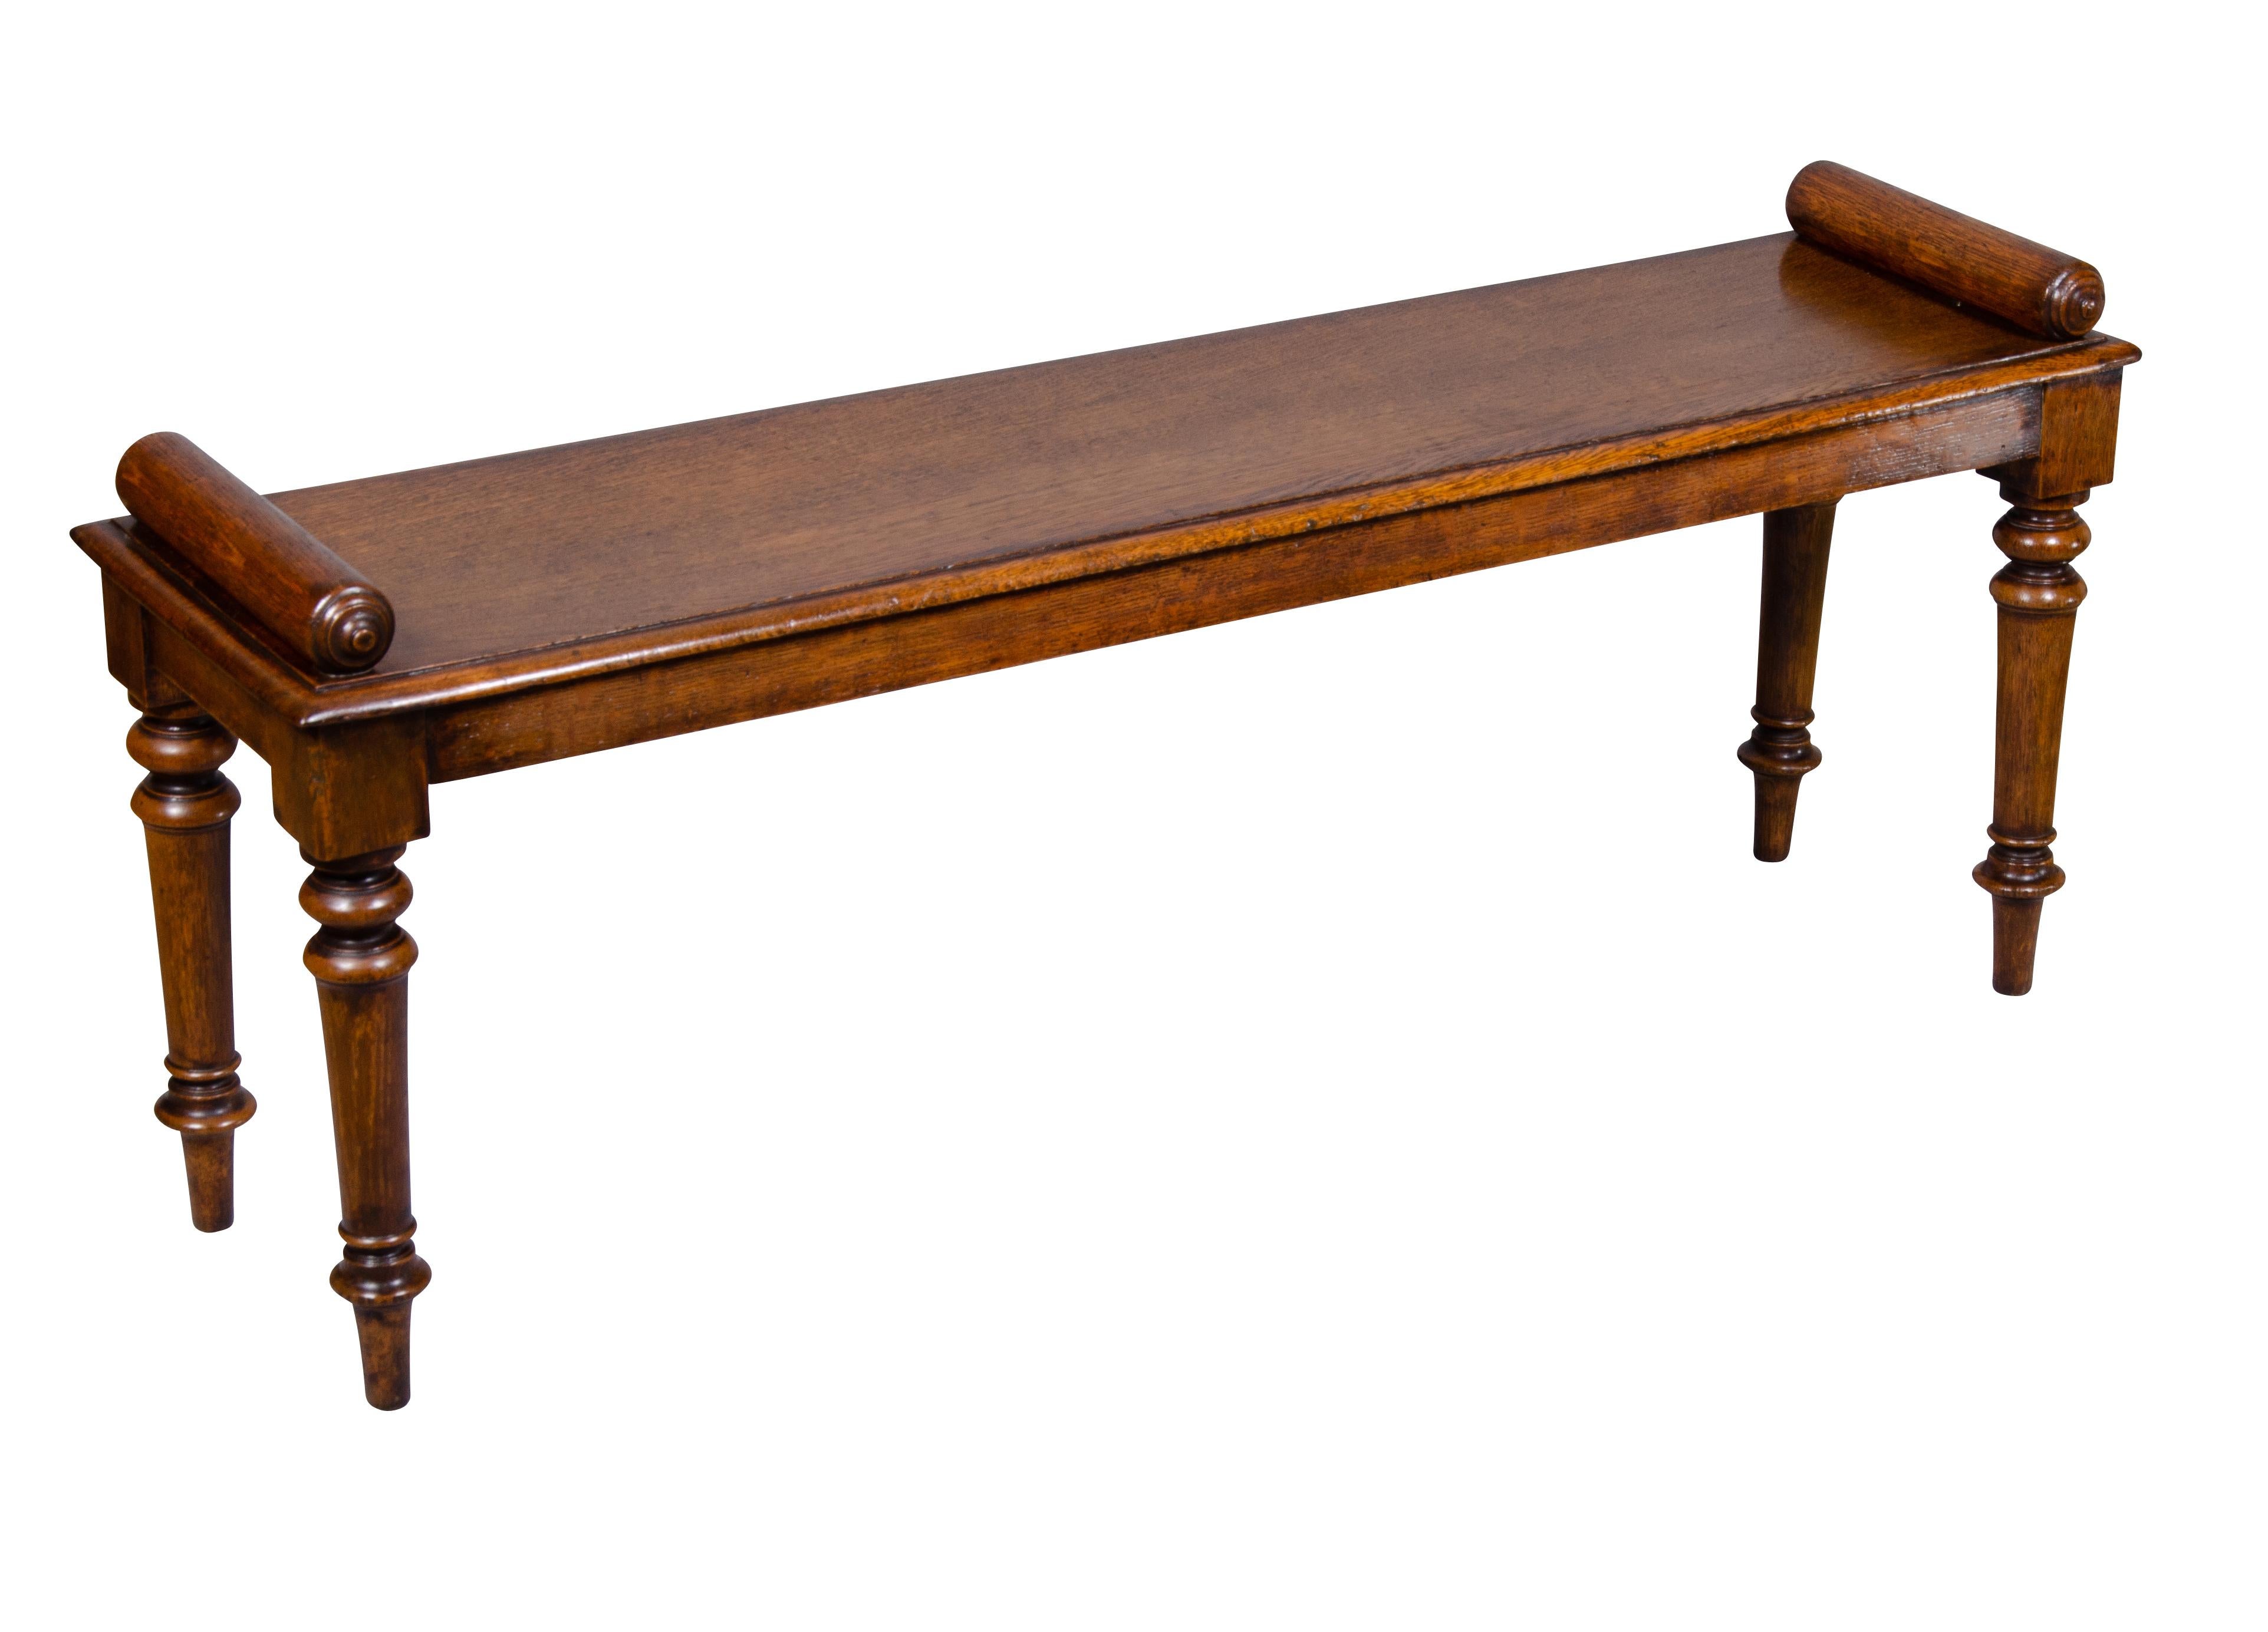 Rectangular top with cylindrical hand holds, raised on turned legs. Classic form.